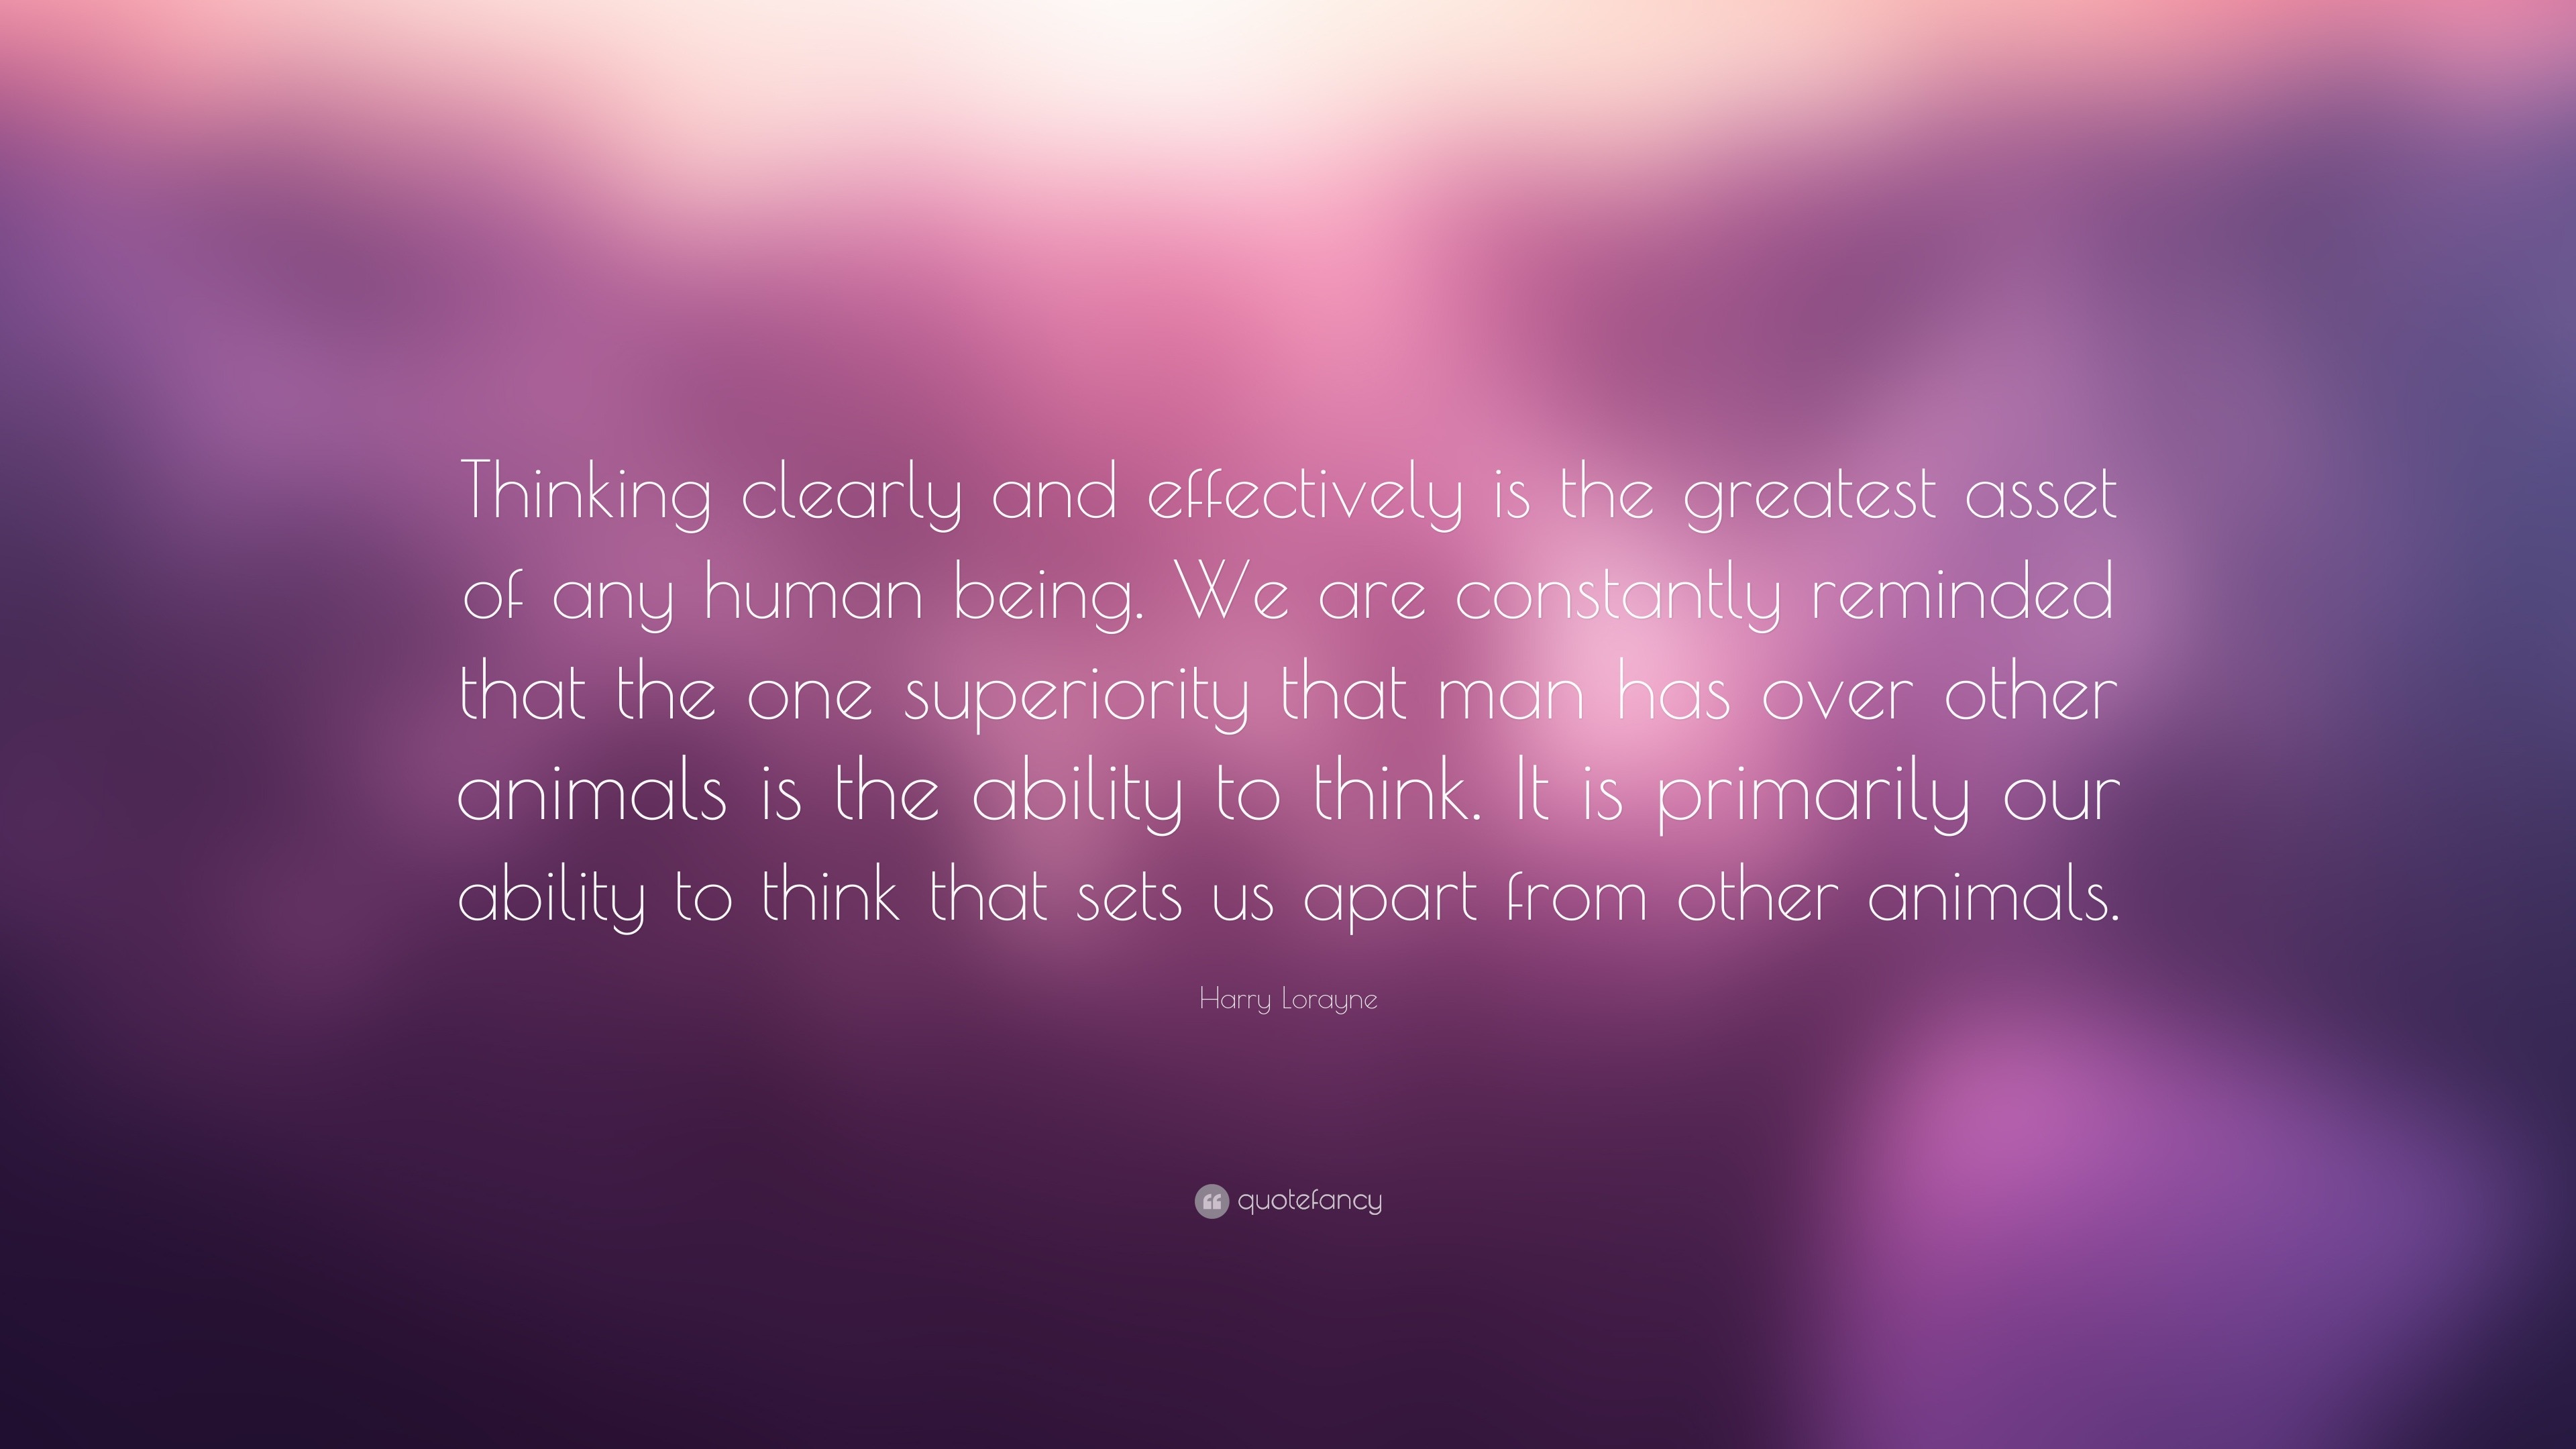 Harry Lorayne Quote: “Thinking clearly and effectively is the greatest  asset of any human being. We are constantly reminded that the one super...”